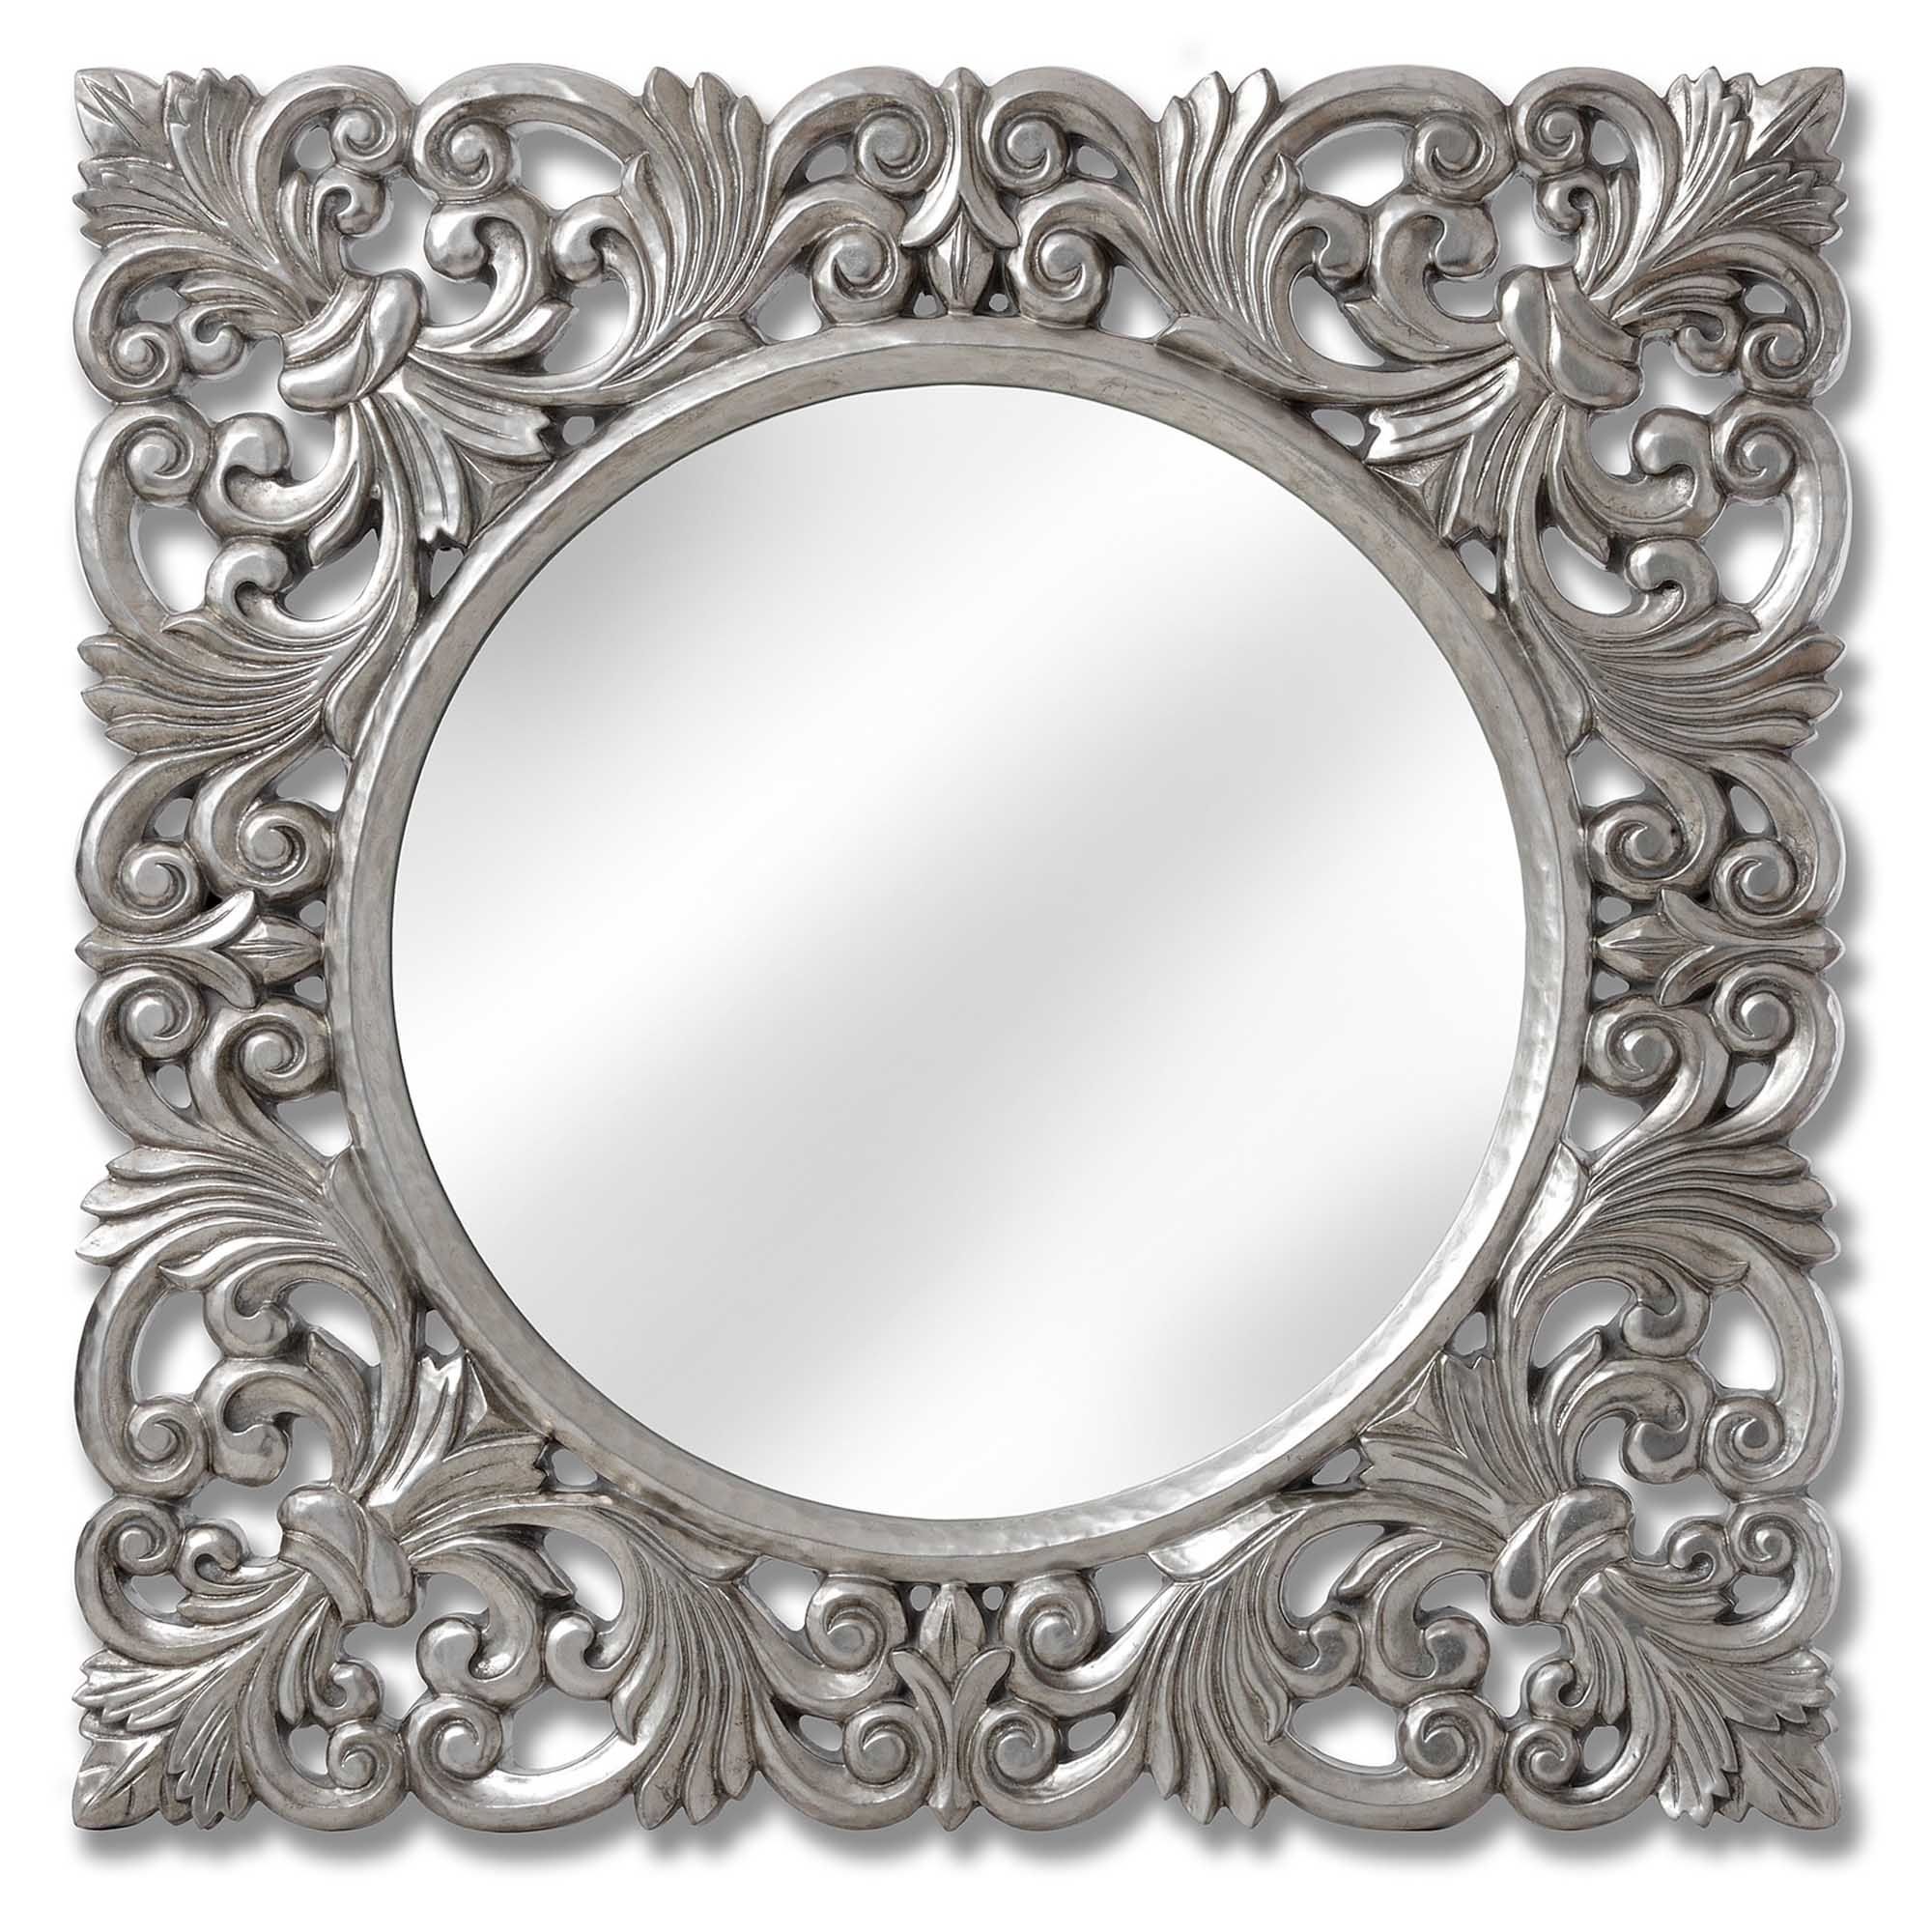 Baroque Antique French Style Silver Wall Mirror | Homesdirect365 In Silver Quatrefoil Wall Mirrors (View 4 of 15)